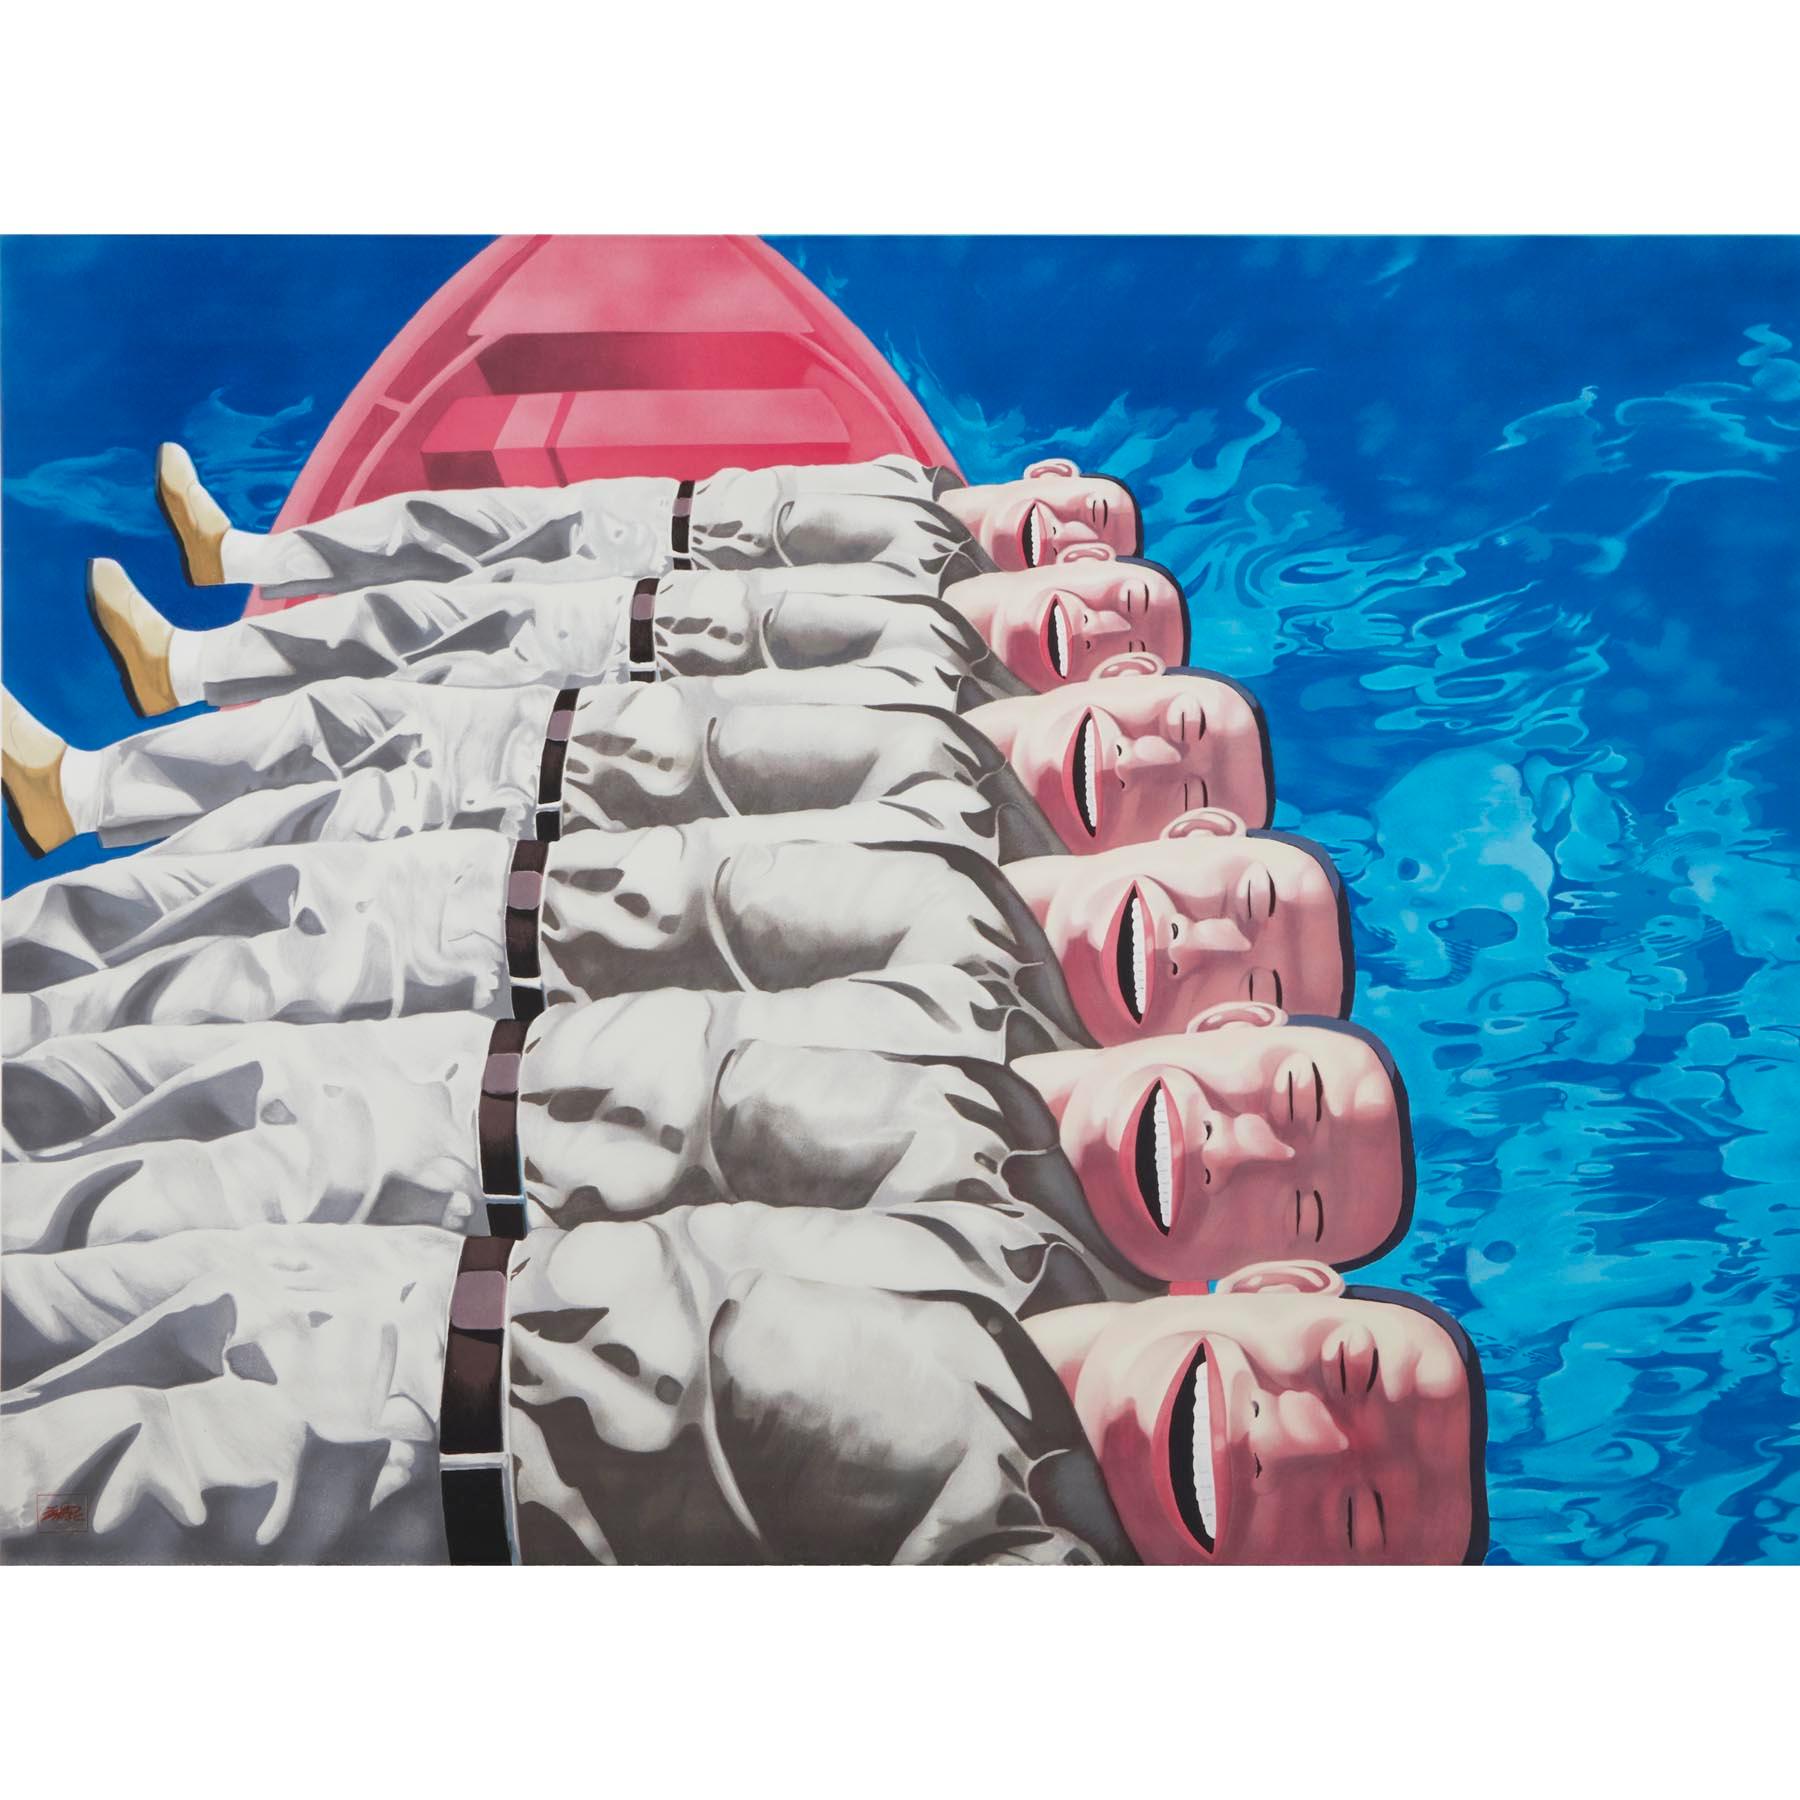 Yue Minjun, Red Boat
Contemporary, 21st Century, Lithograph, Limited Edition, Chinese
Lithograph
Edition of 130
80 × 120 cm (47 1/5 × 31 1/2 in)
Signed and numbered, accompanied by Certificate of Authenticity
In mint condition, as acquired from the